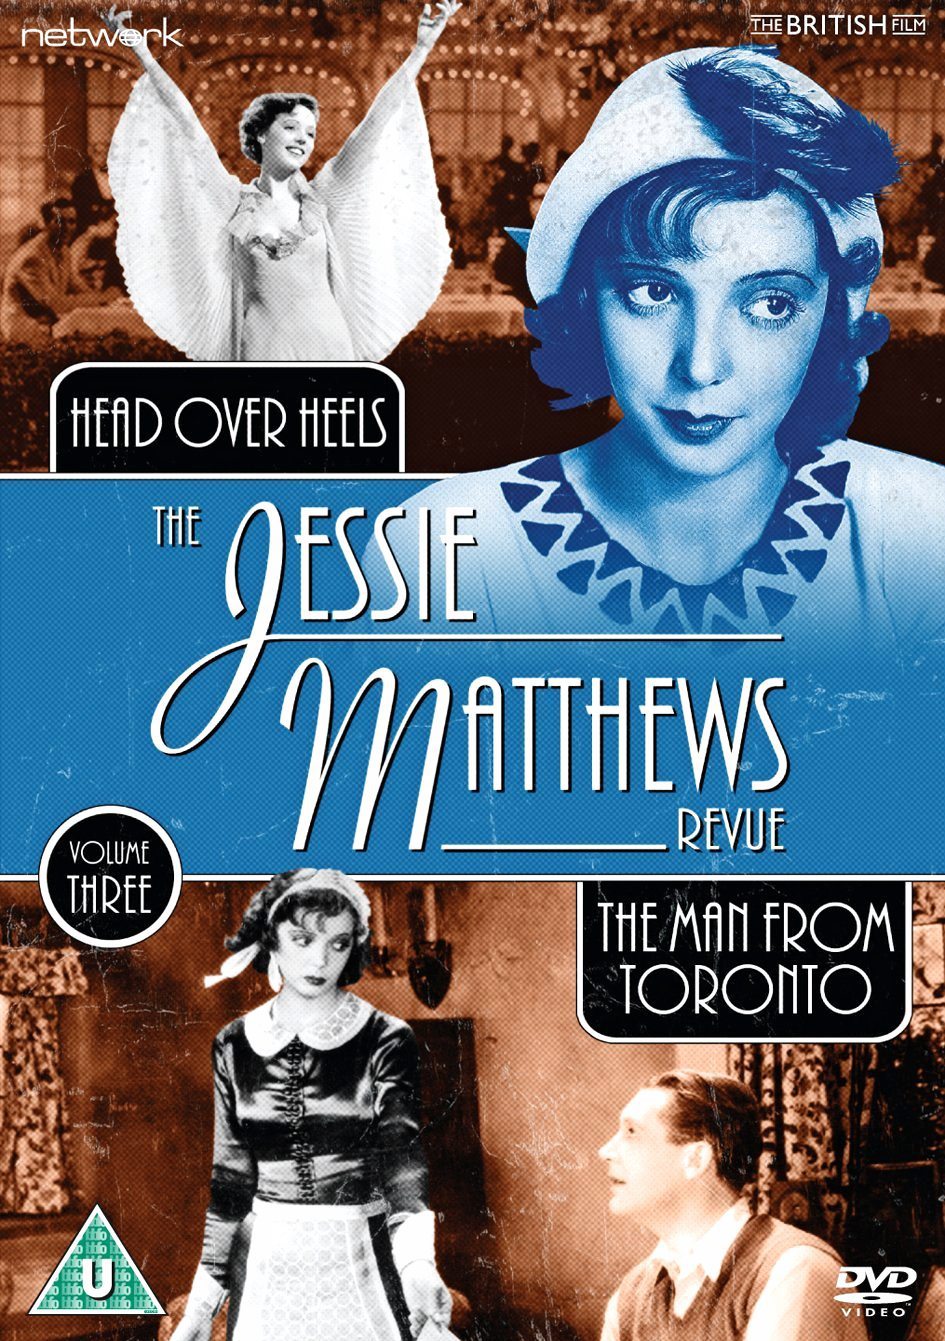 The Jessie Matthews Revue Volume 3 from Network and The British Film.  Features Head over Heels and The Man From Toronto